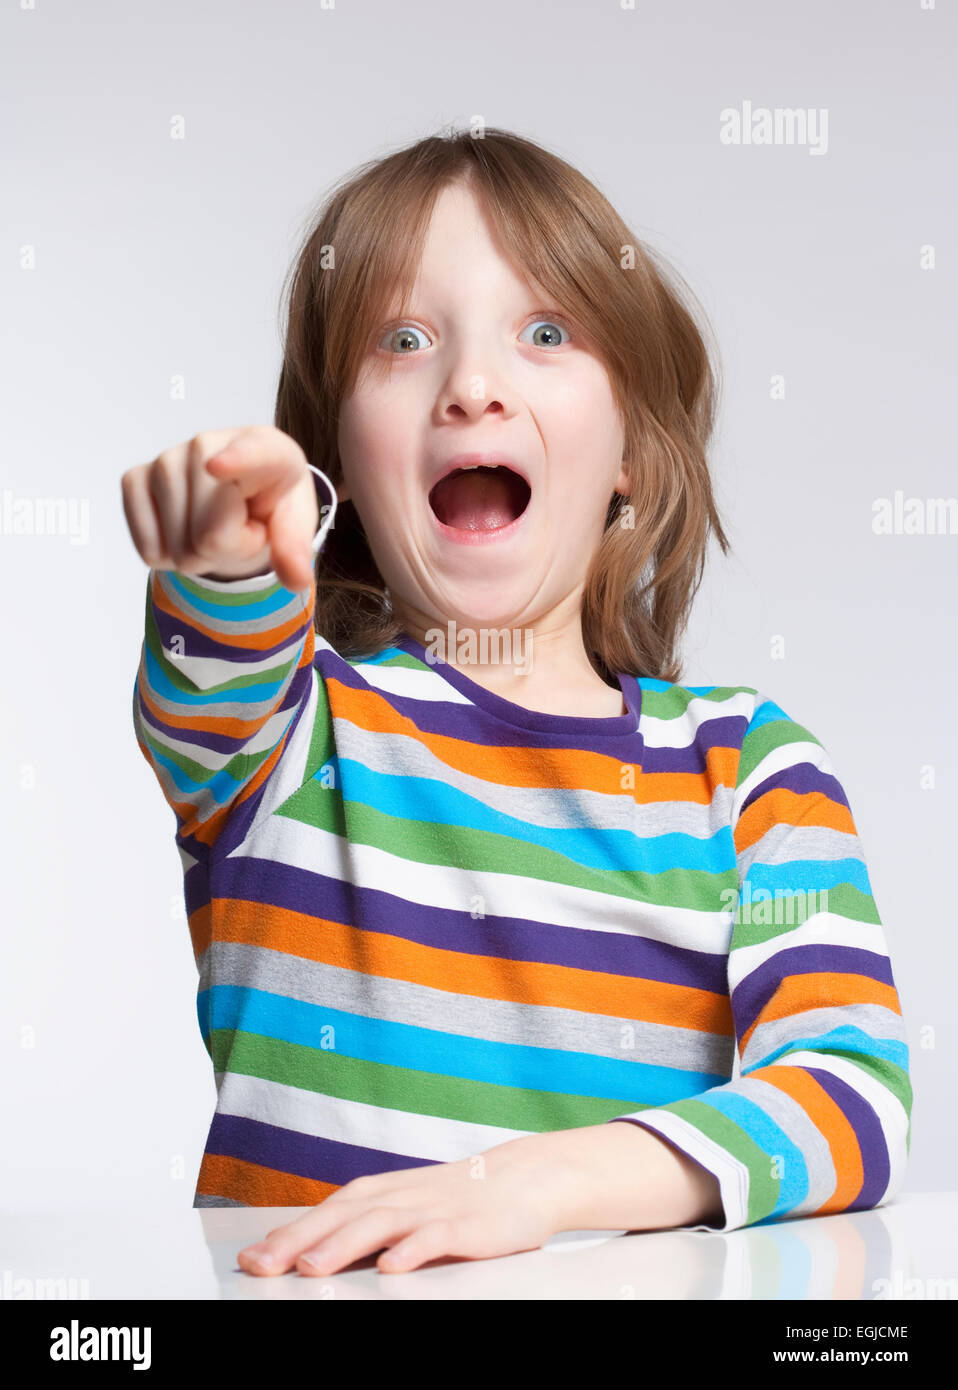 Boy with Blond Hair Pointing with his Mouth Open Stock Photo